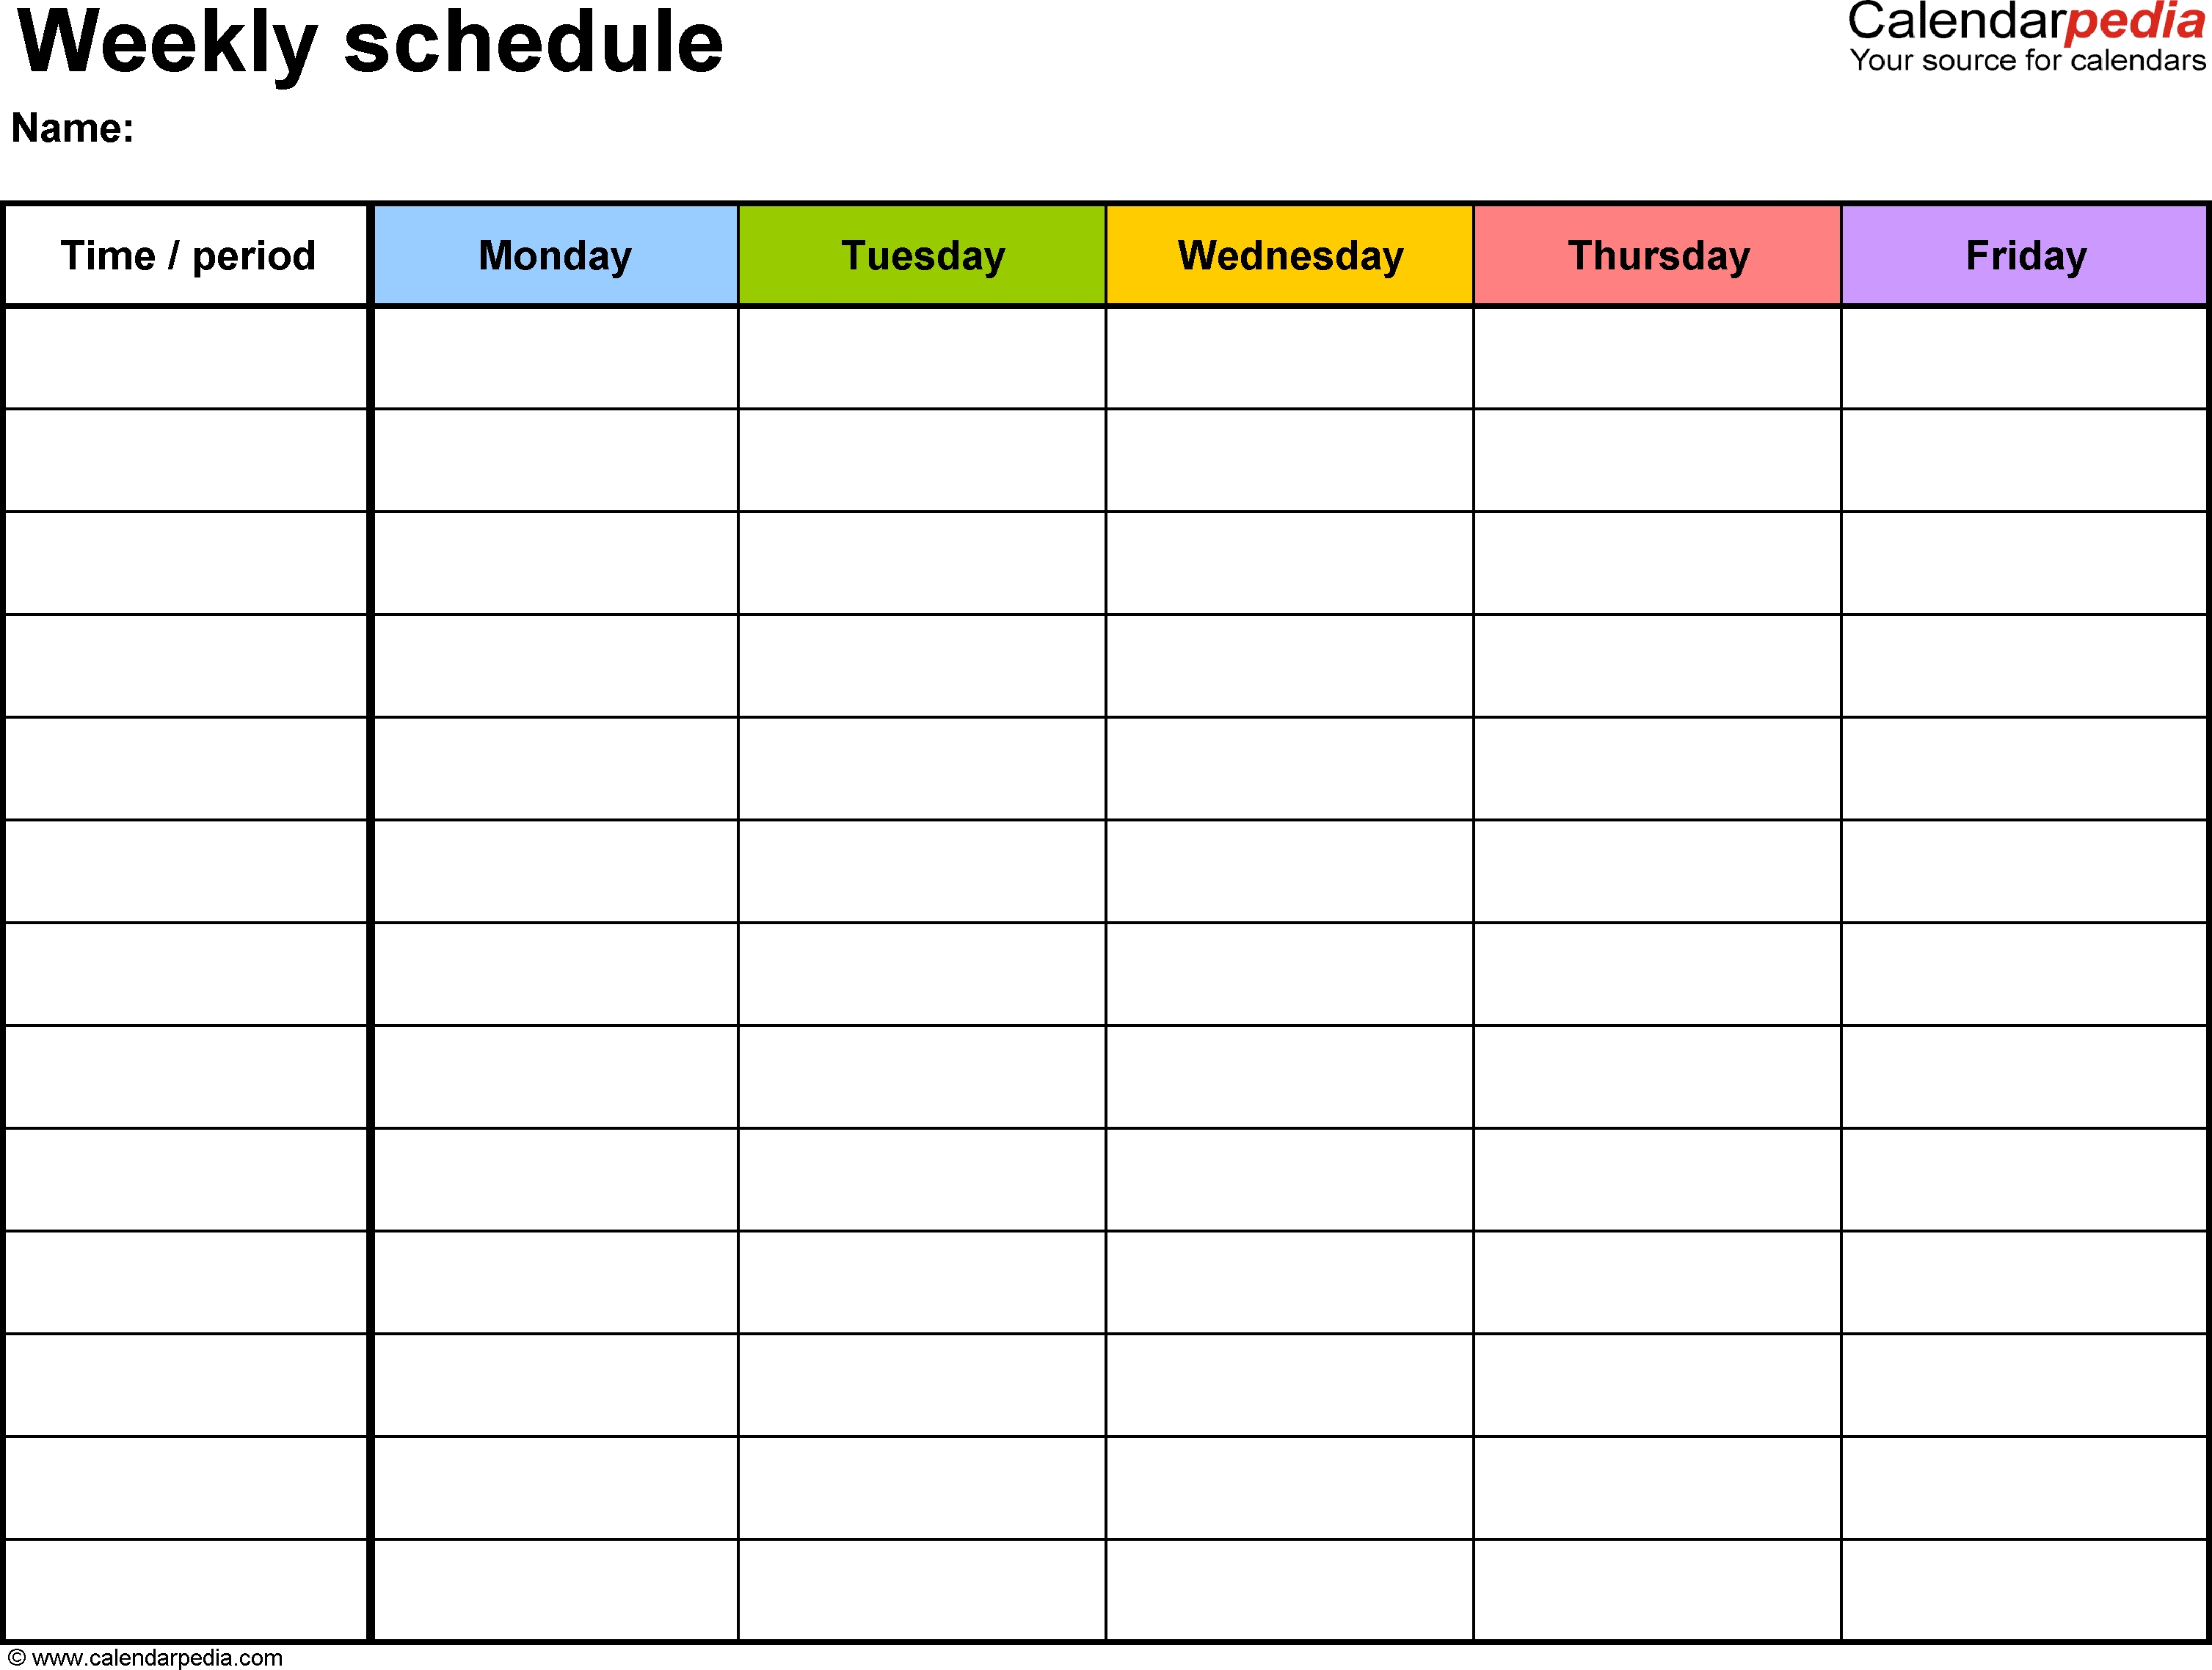 Free Weekly Schedule Templates For Word - 18 Templates-2 Week Schedule Template